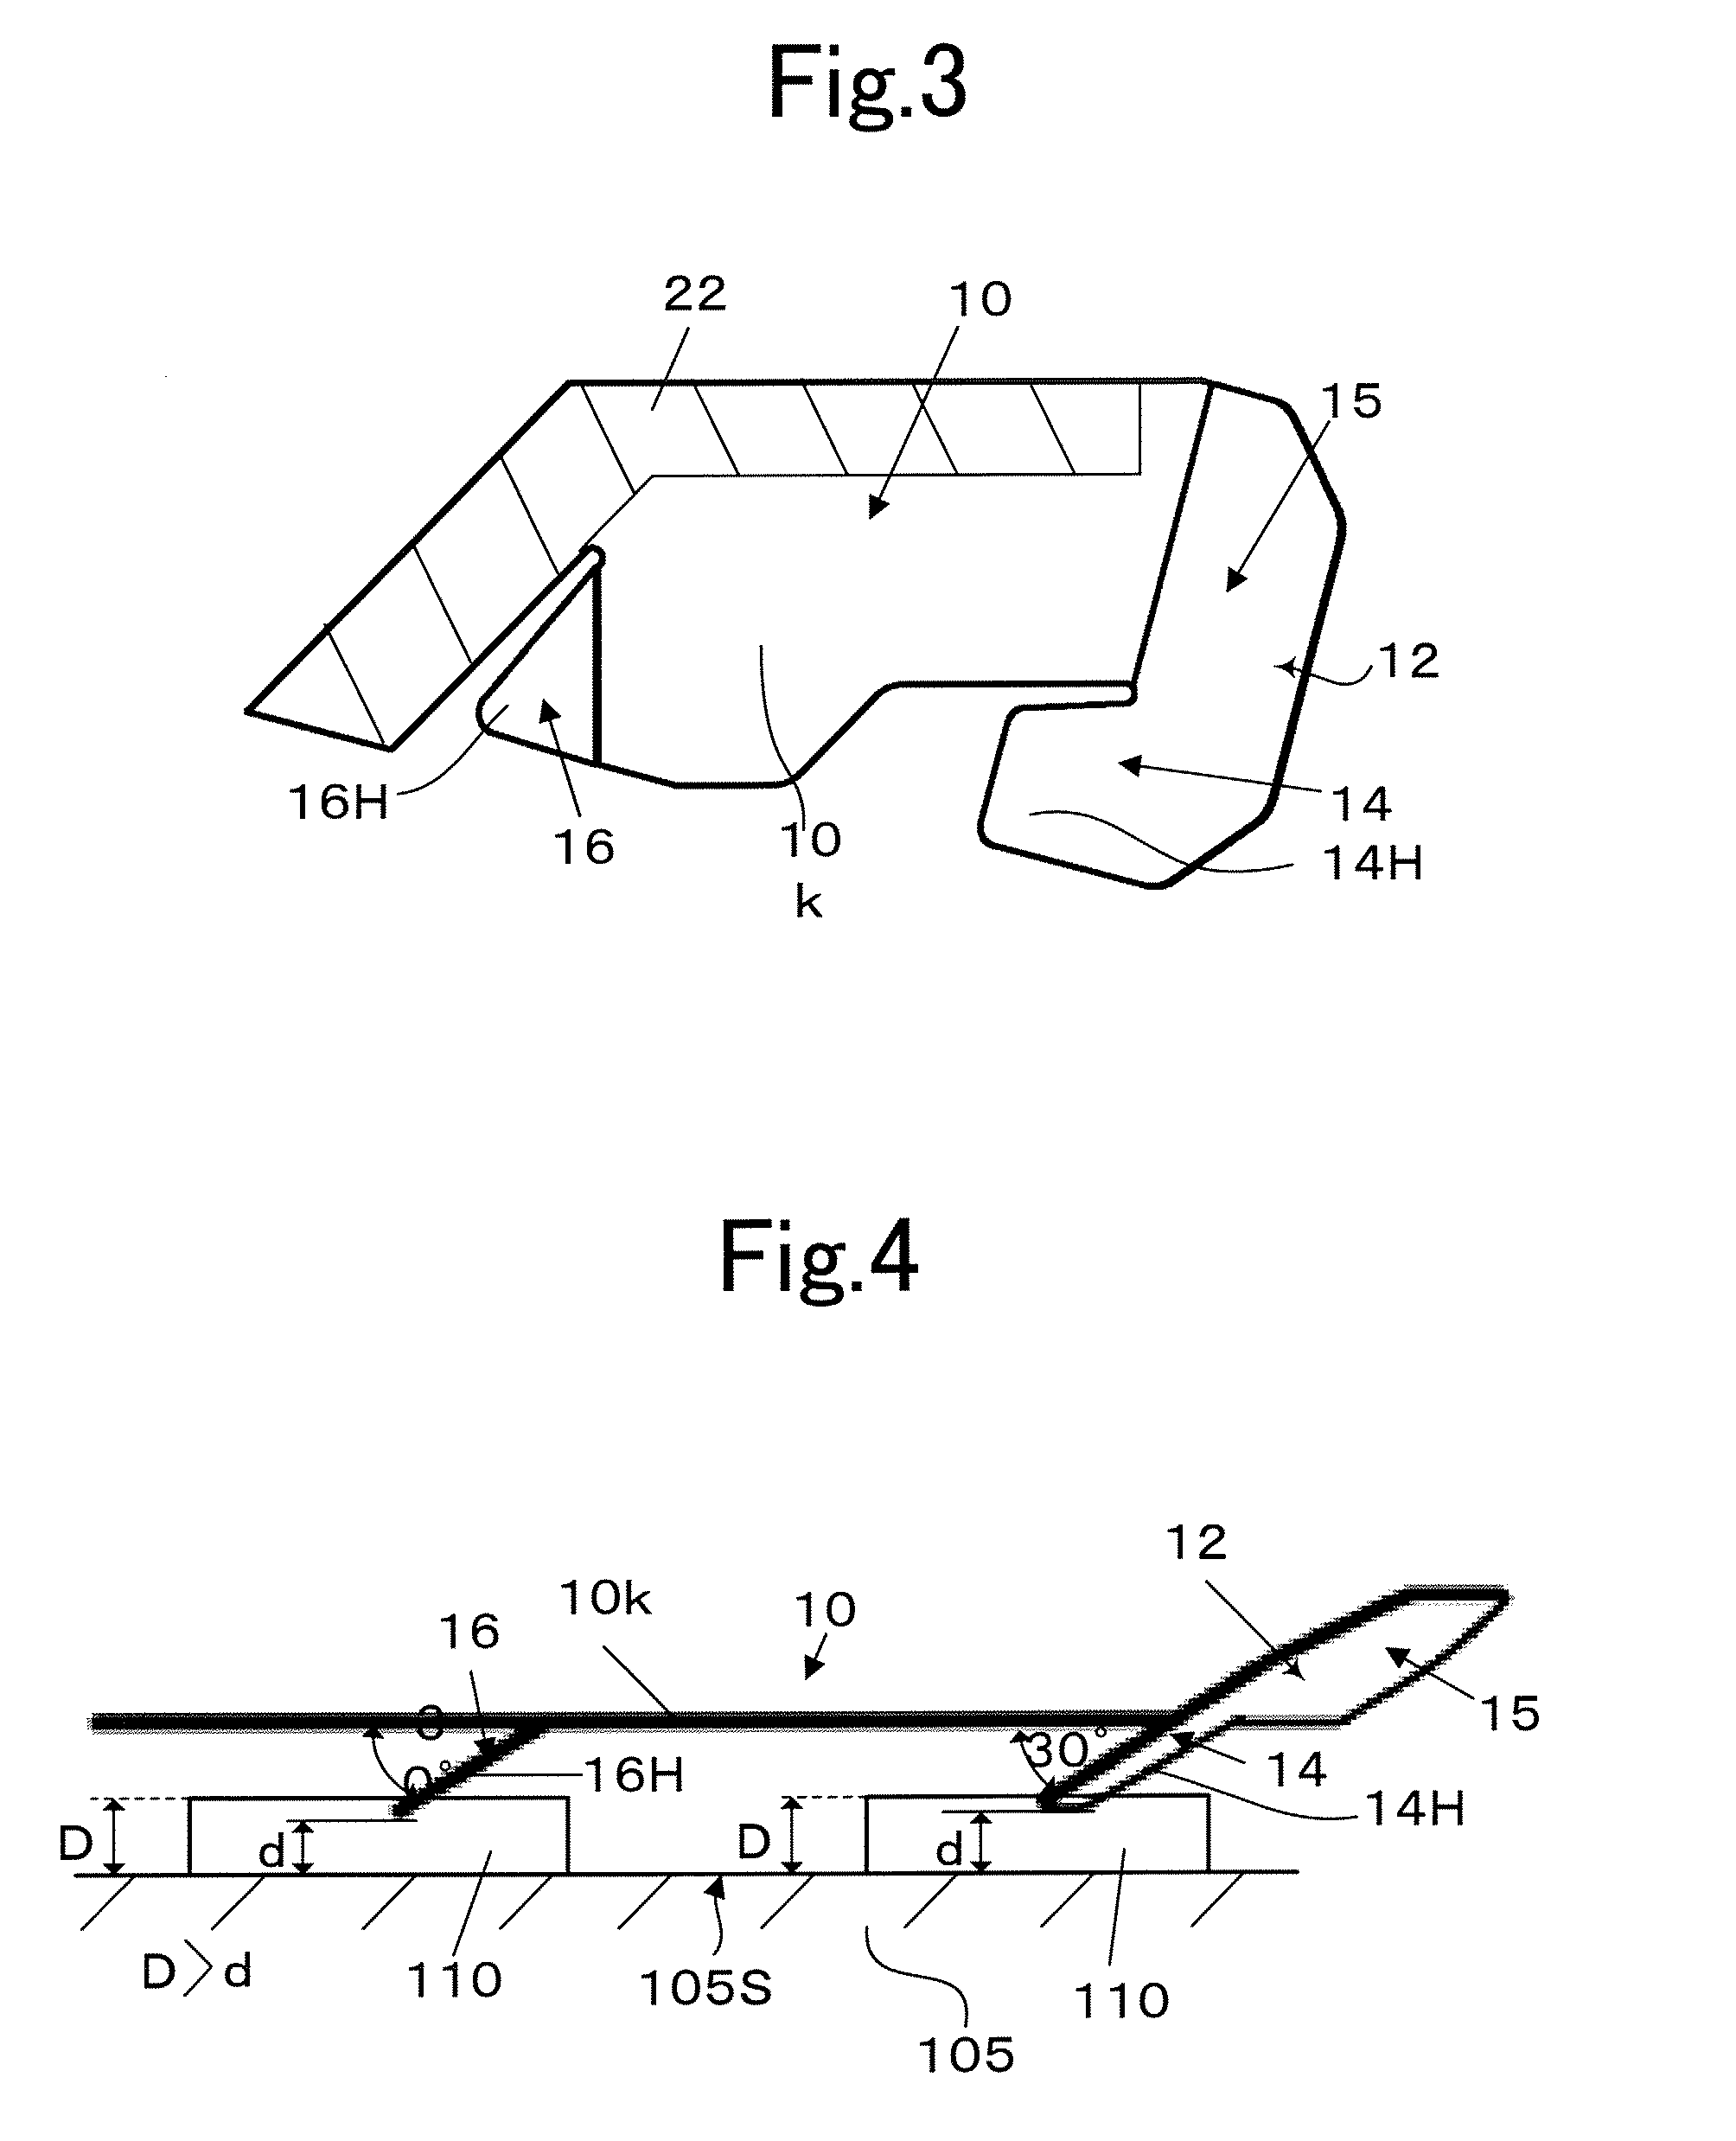 Coin feeding apparatus and method for biasing a release of coins